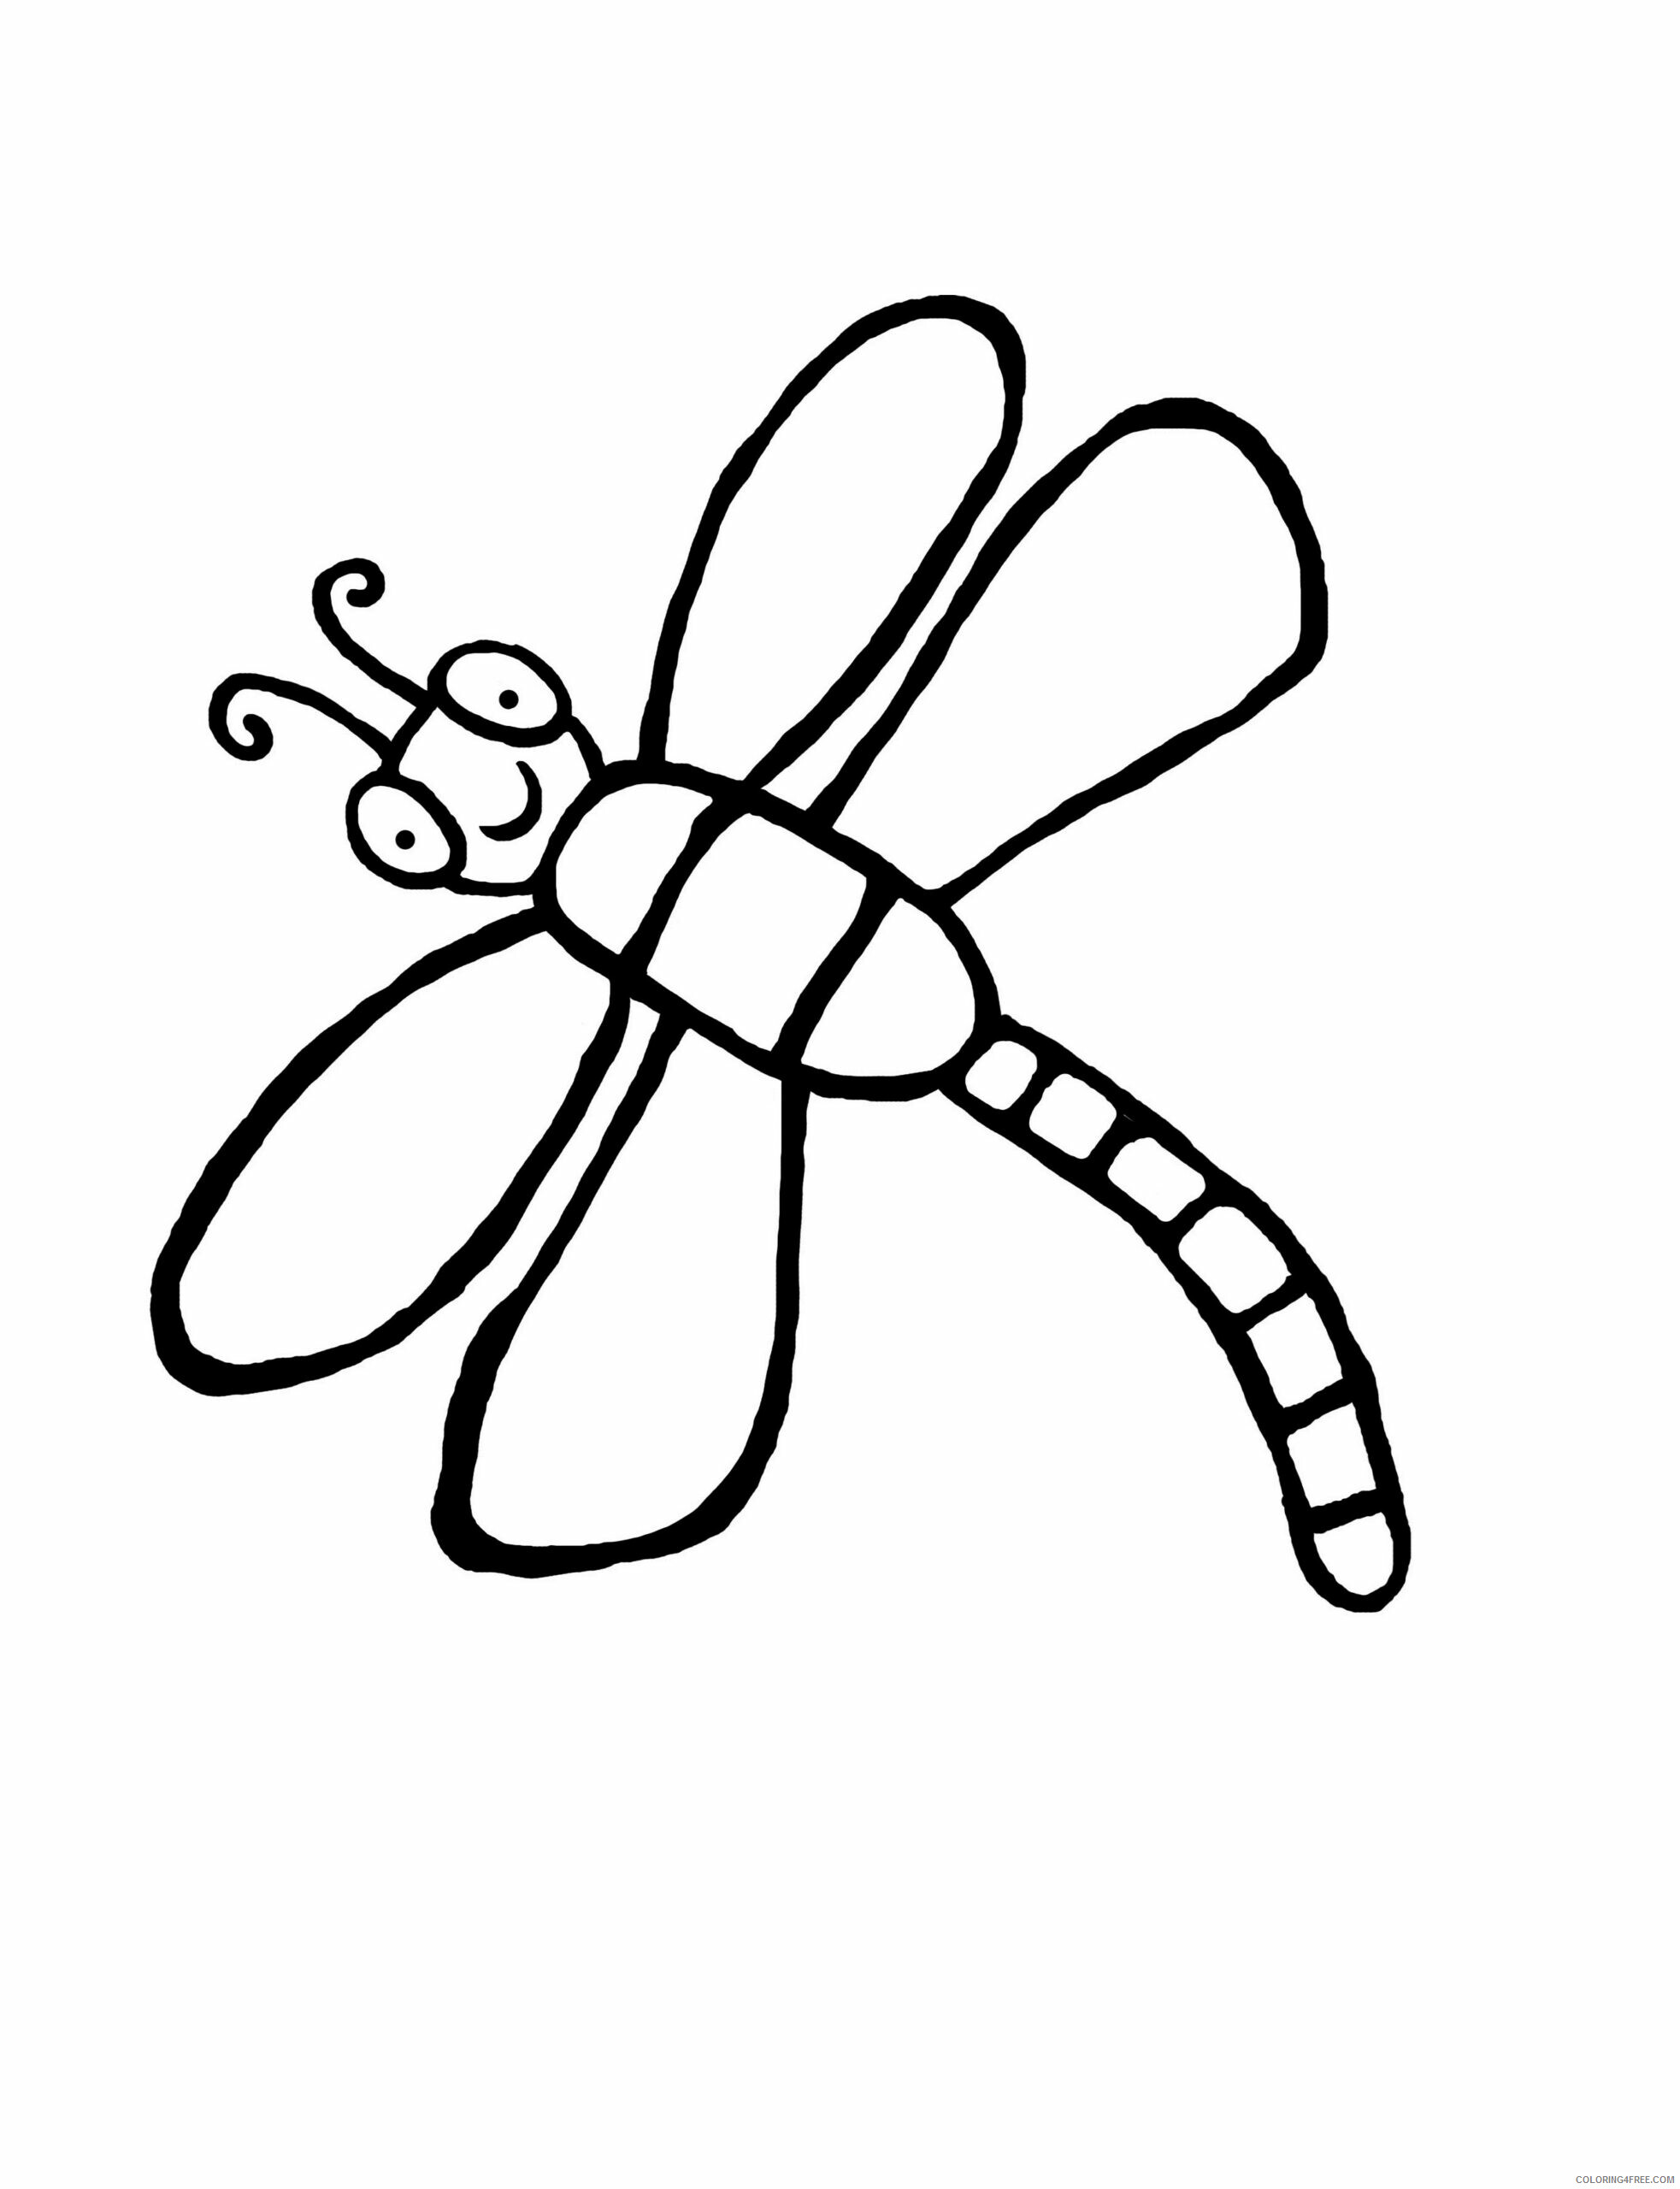 Dragonfly Coloring Pages Animal Printable Sheets Dragonfly Images 2021 1779 Coloring4free